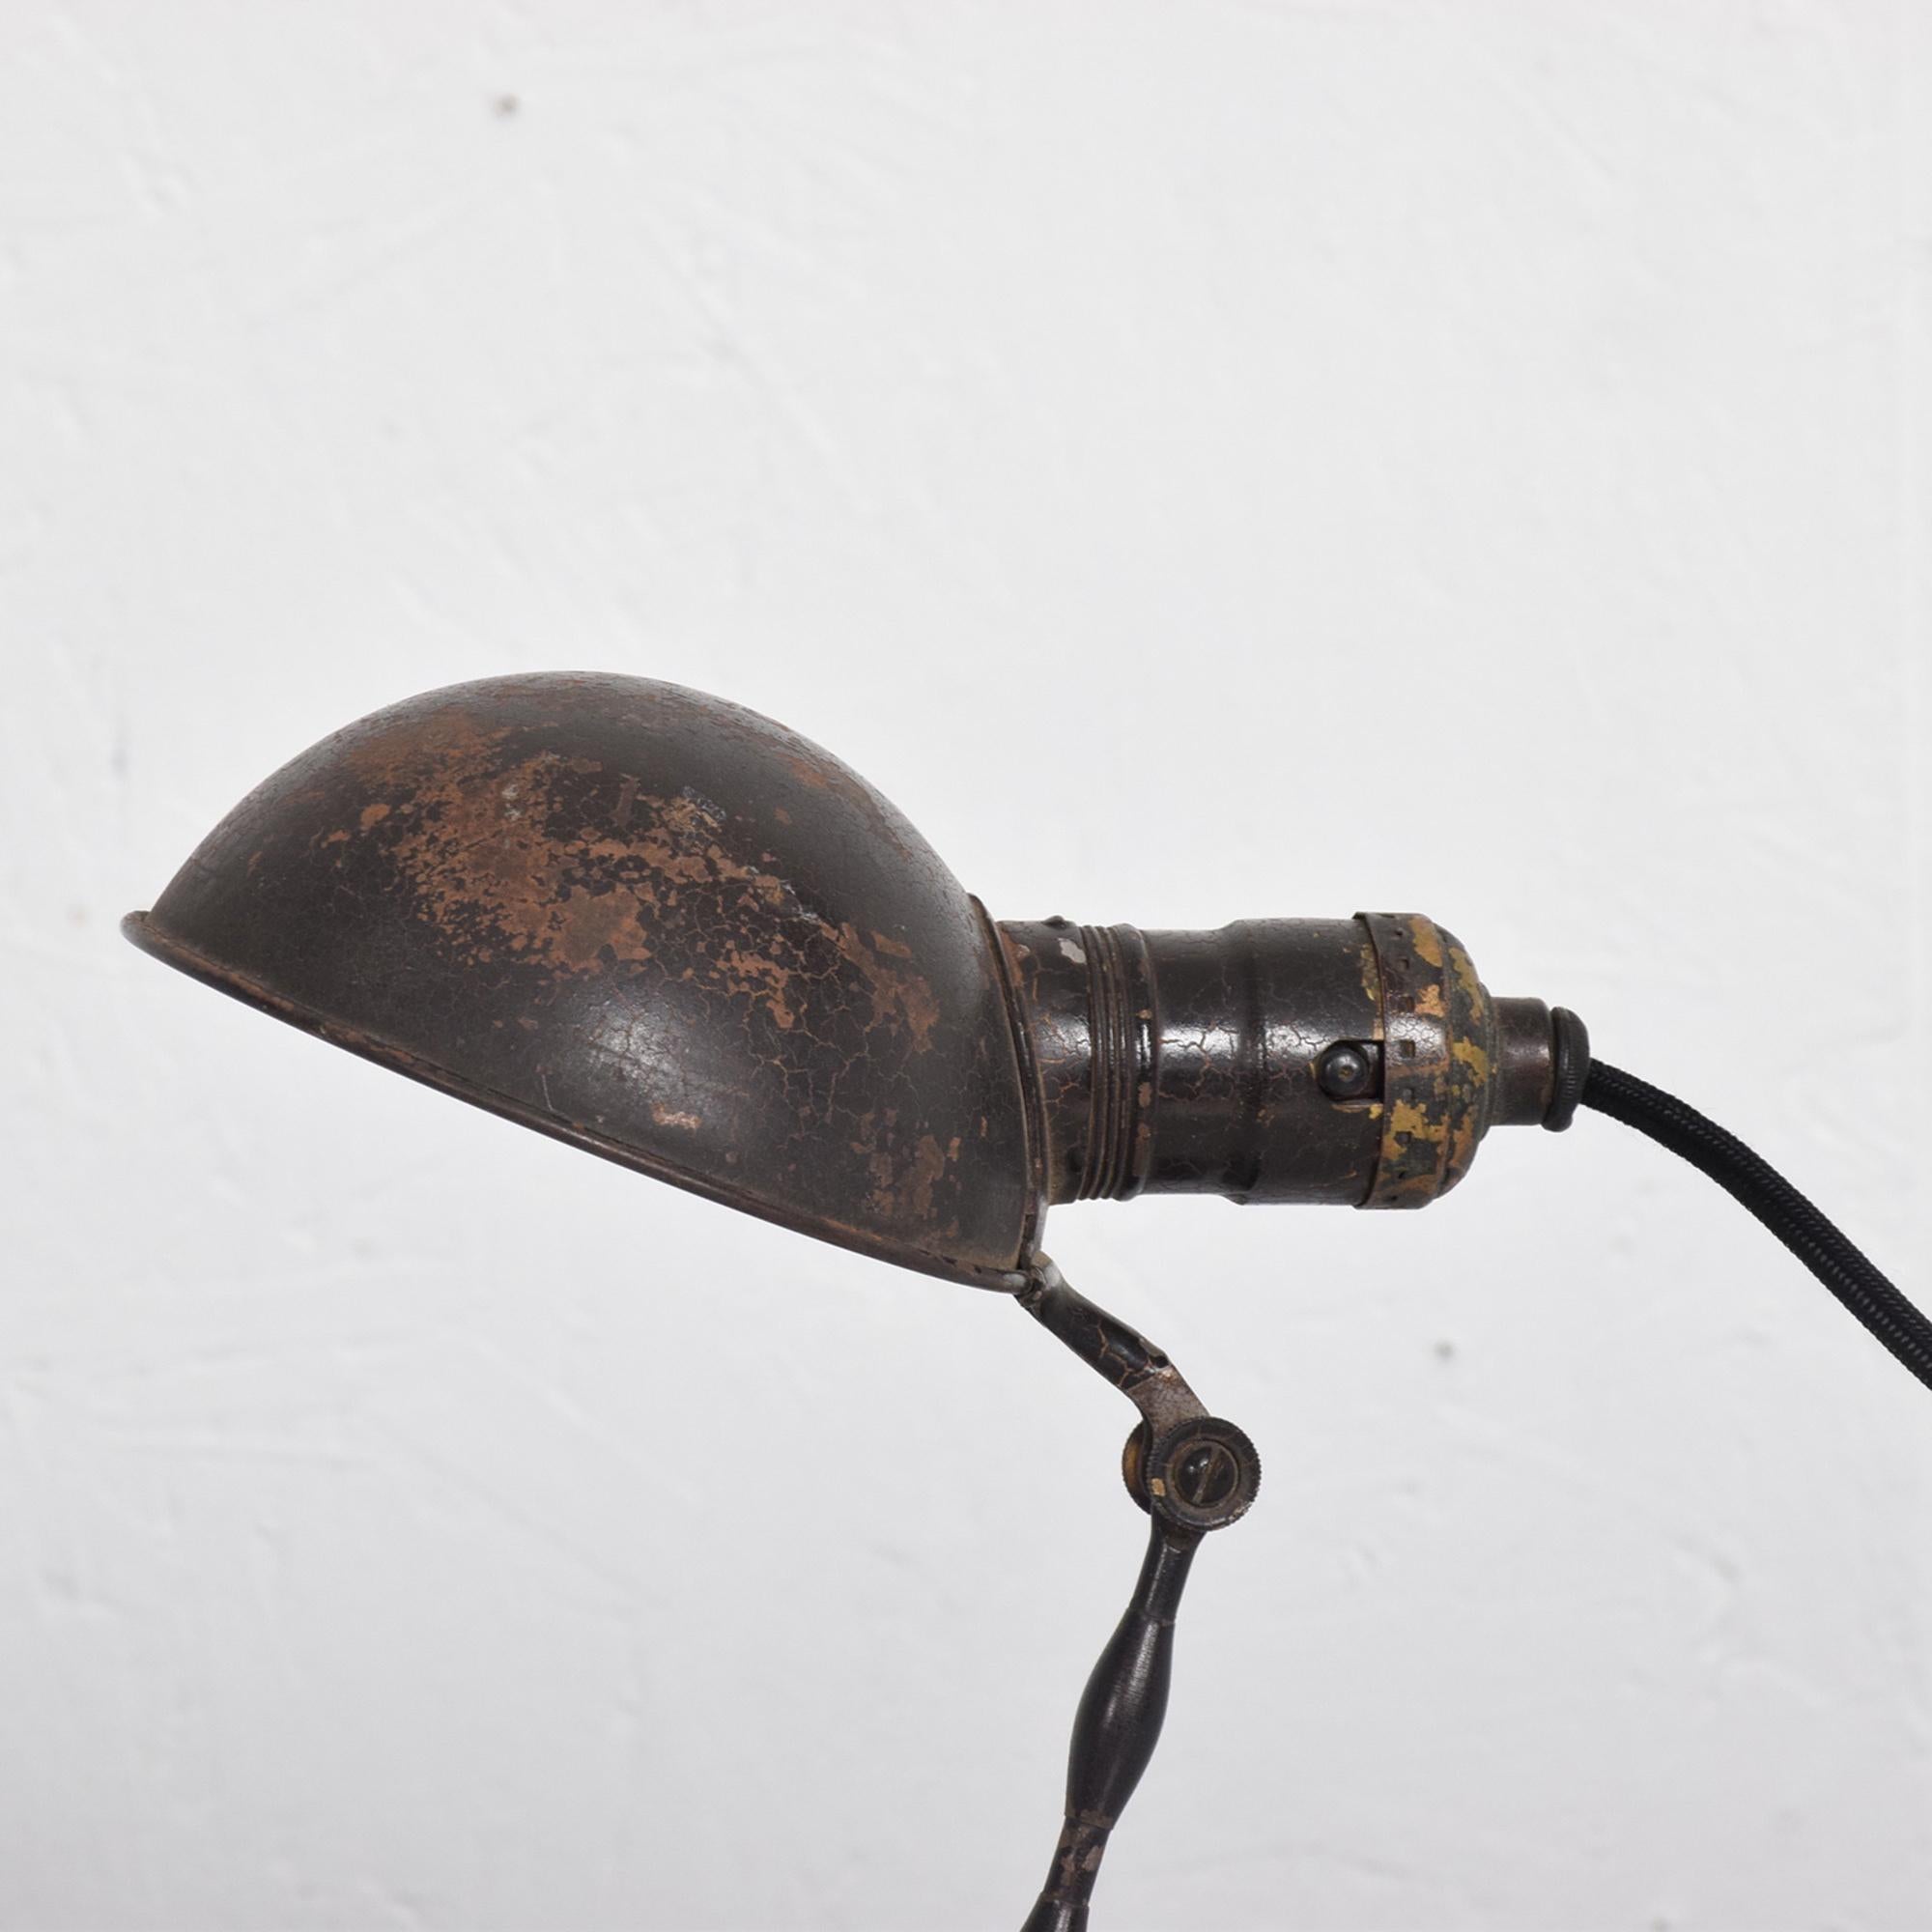 Unique Industrial table lamp that can be adjusted into multiple positions. Painted metal. Color brown.

Lamp can be hung on the wall as a wall sconce original unrestored finish with vintage patina. Wear consistent with age and use. Minor fading.